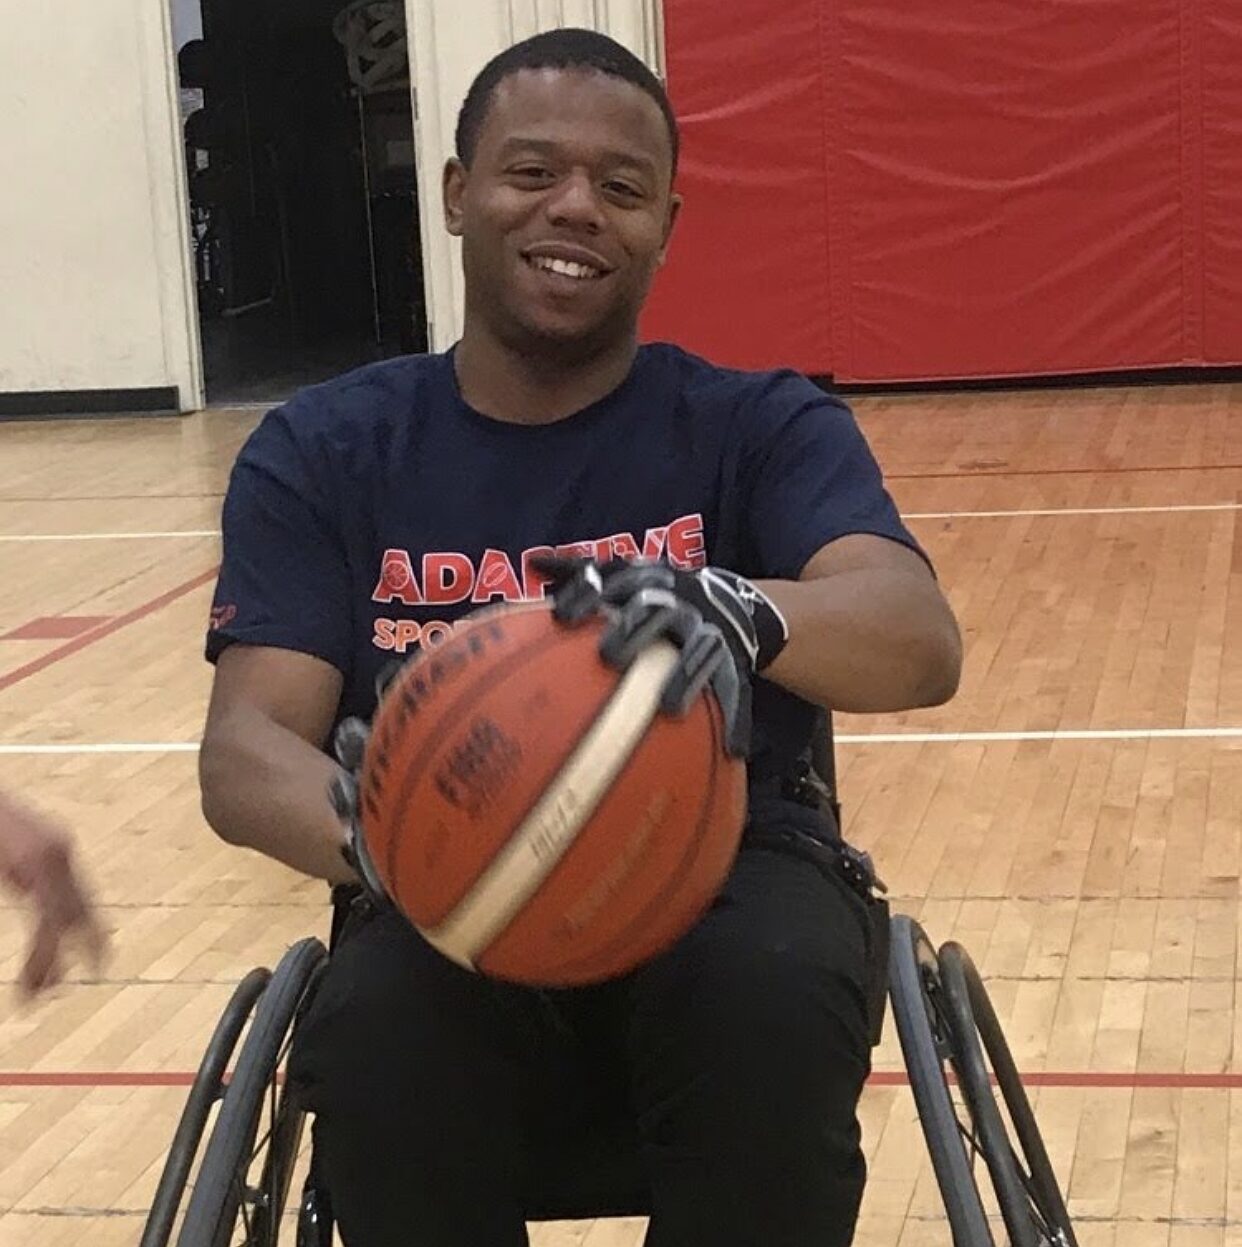 Michael Walthall is seated in his black wheelchair with a big smile on a basketball court as he holds a basketball in gloved hands. Michael has brown skin and short black hair.